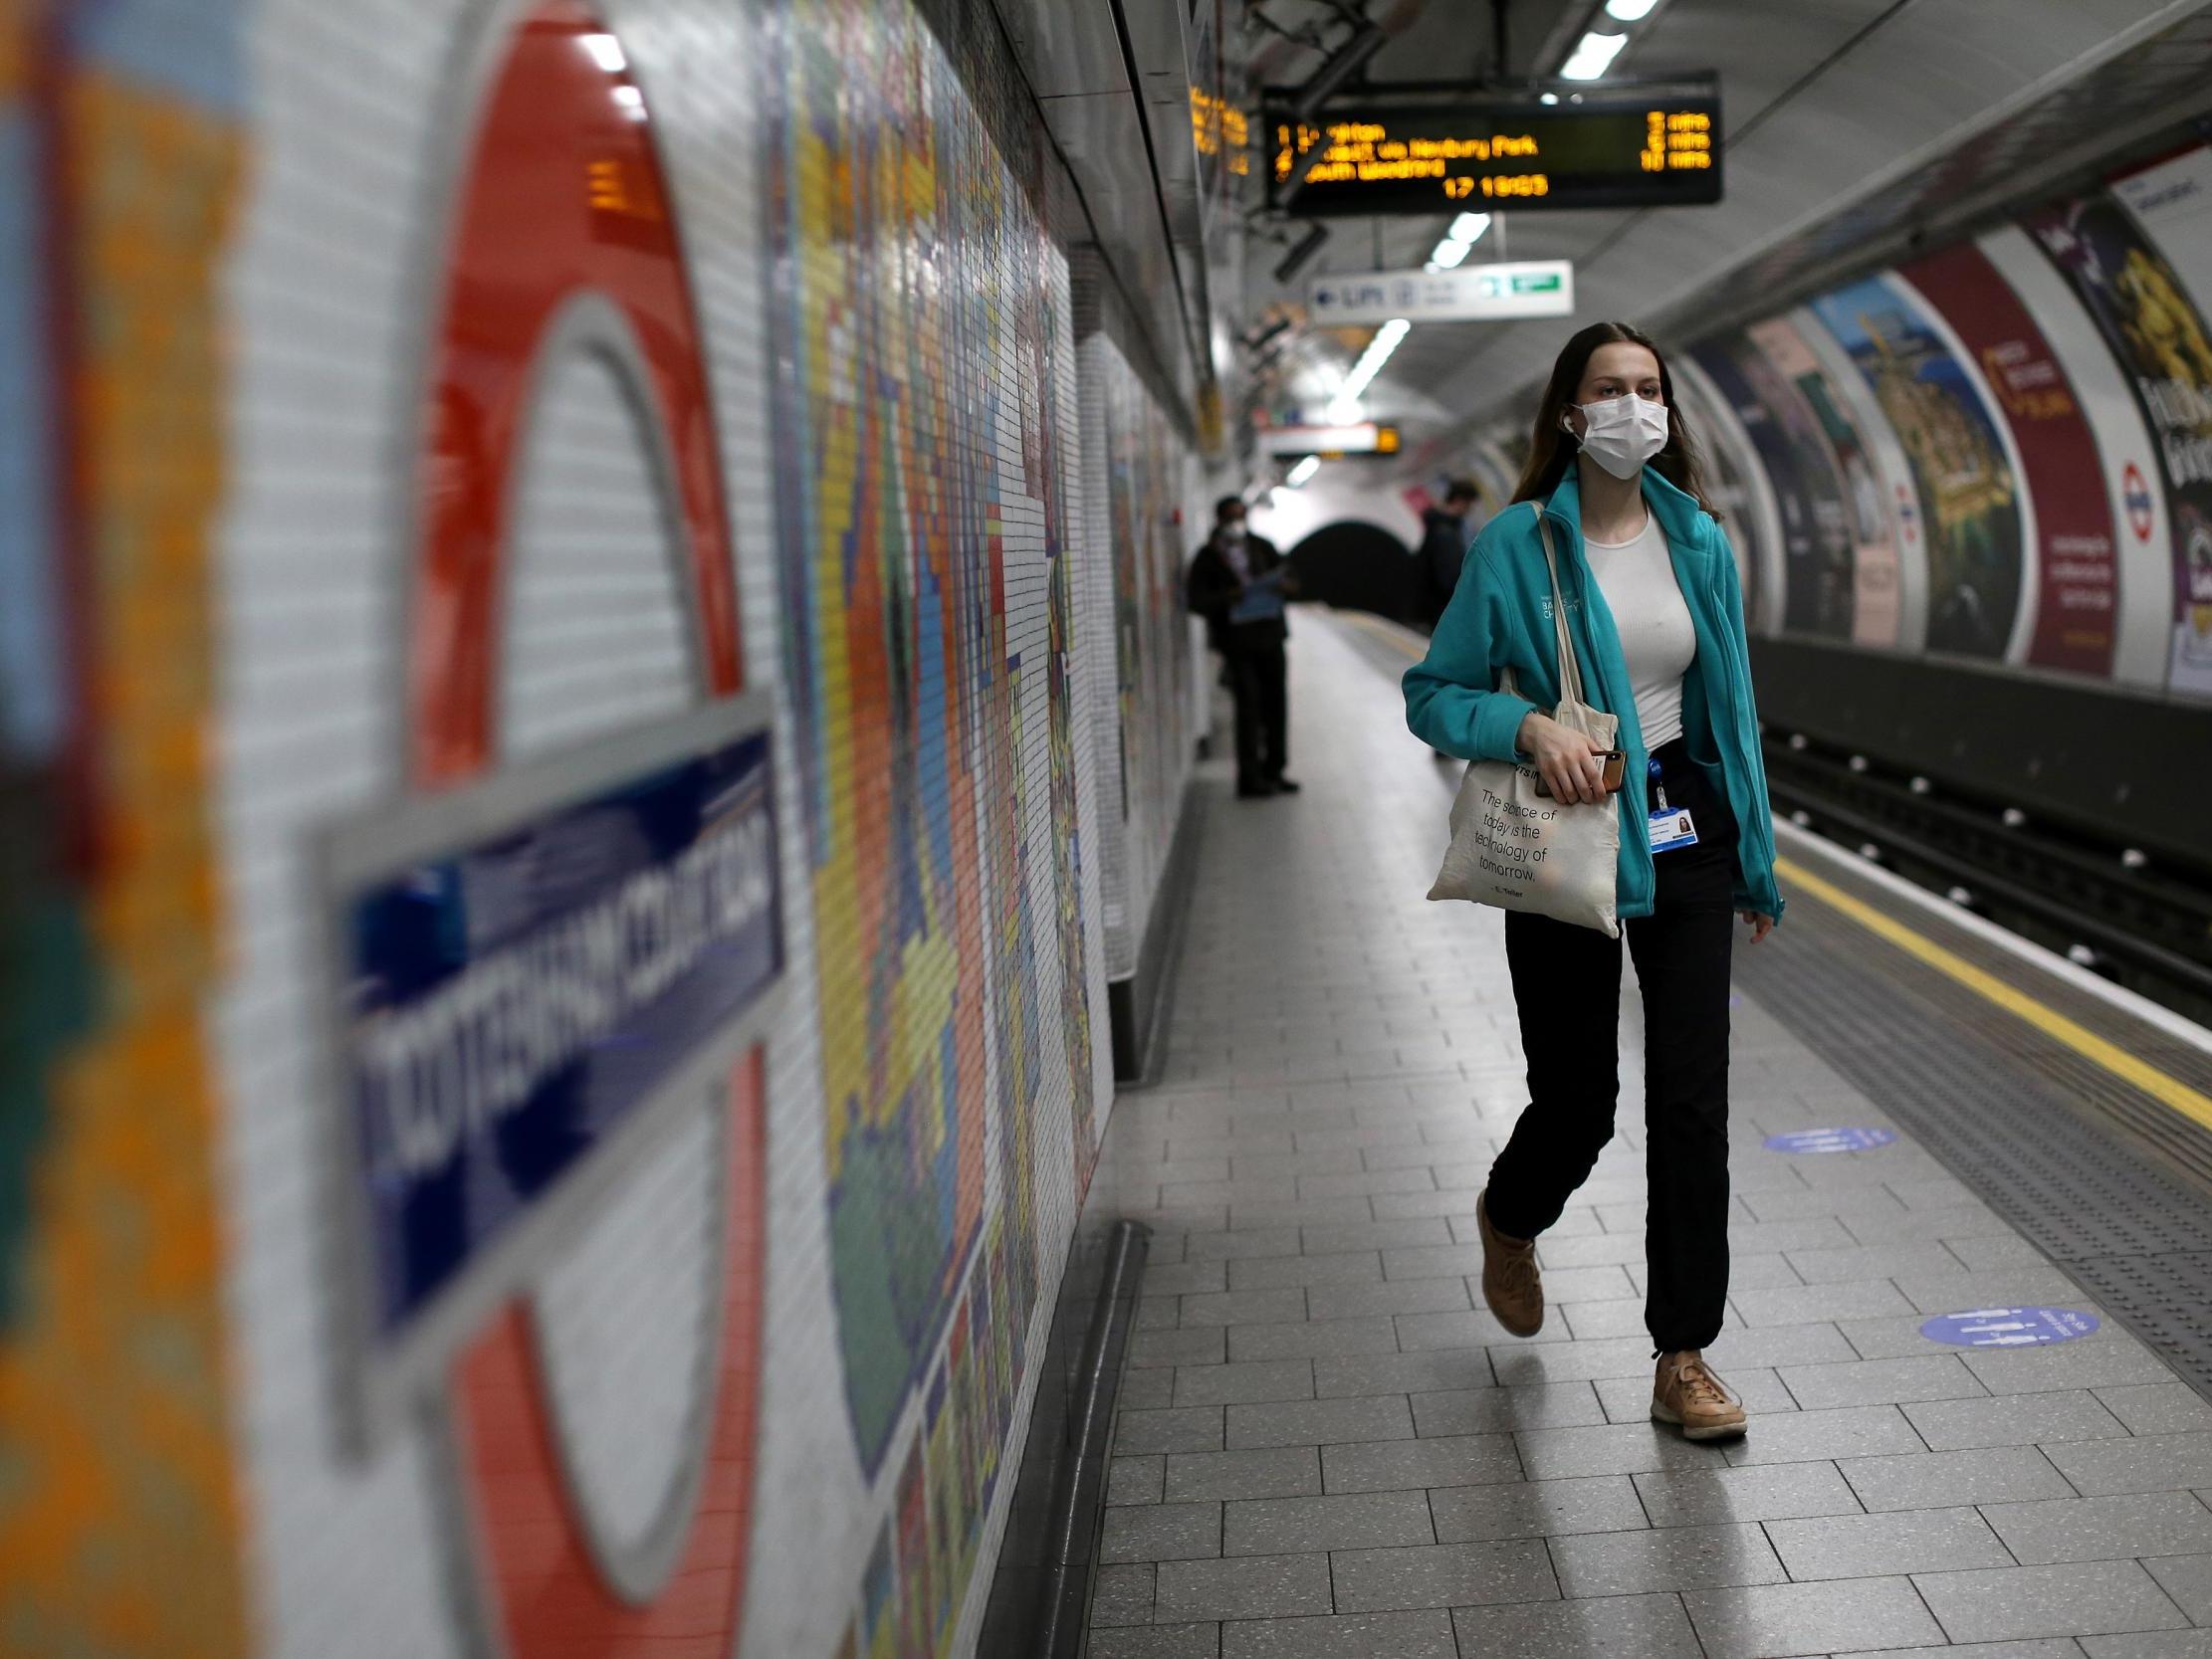 Laws have been introduced making face masks compulsory in public transport and other indoor spaces